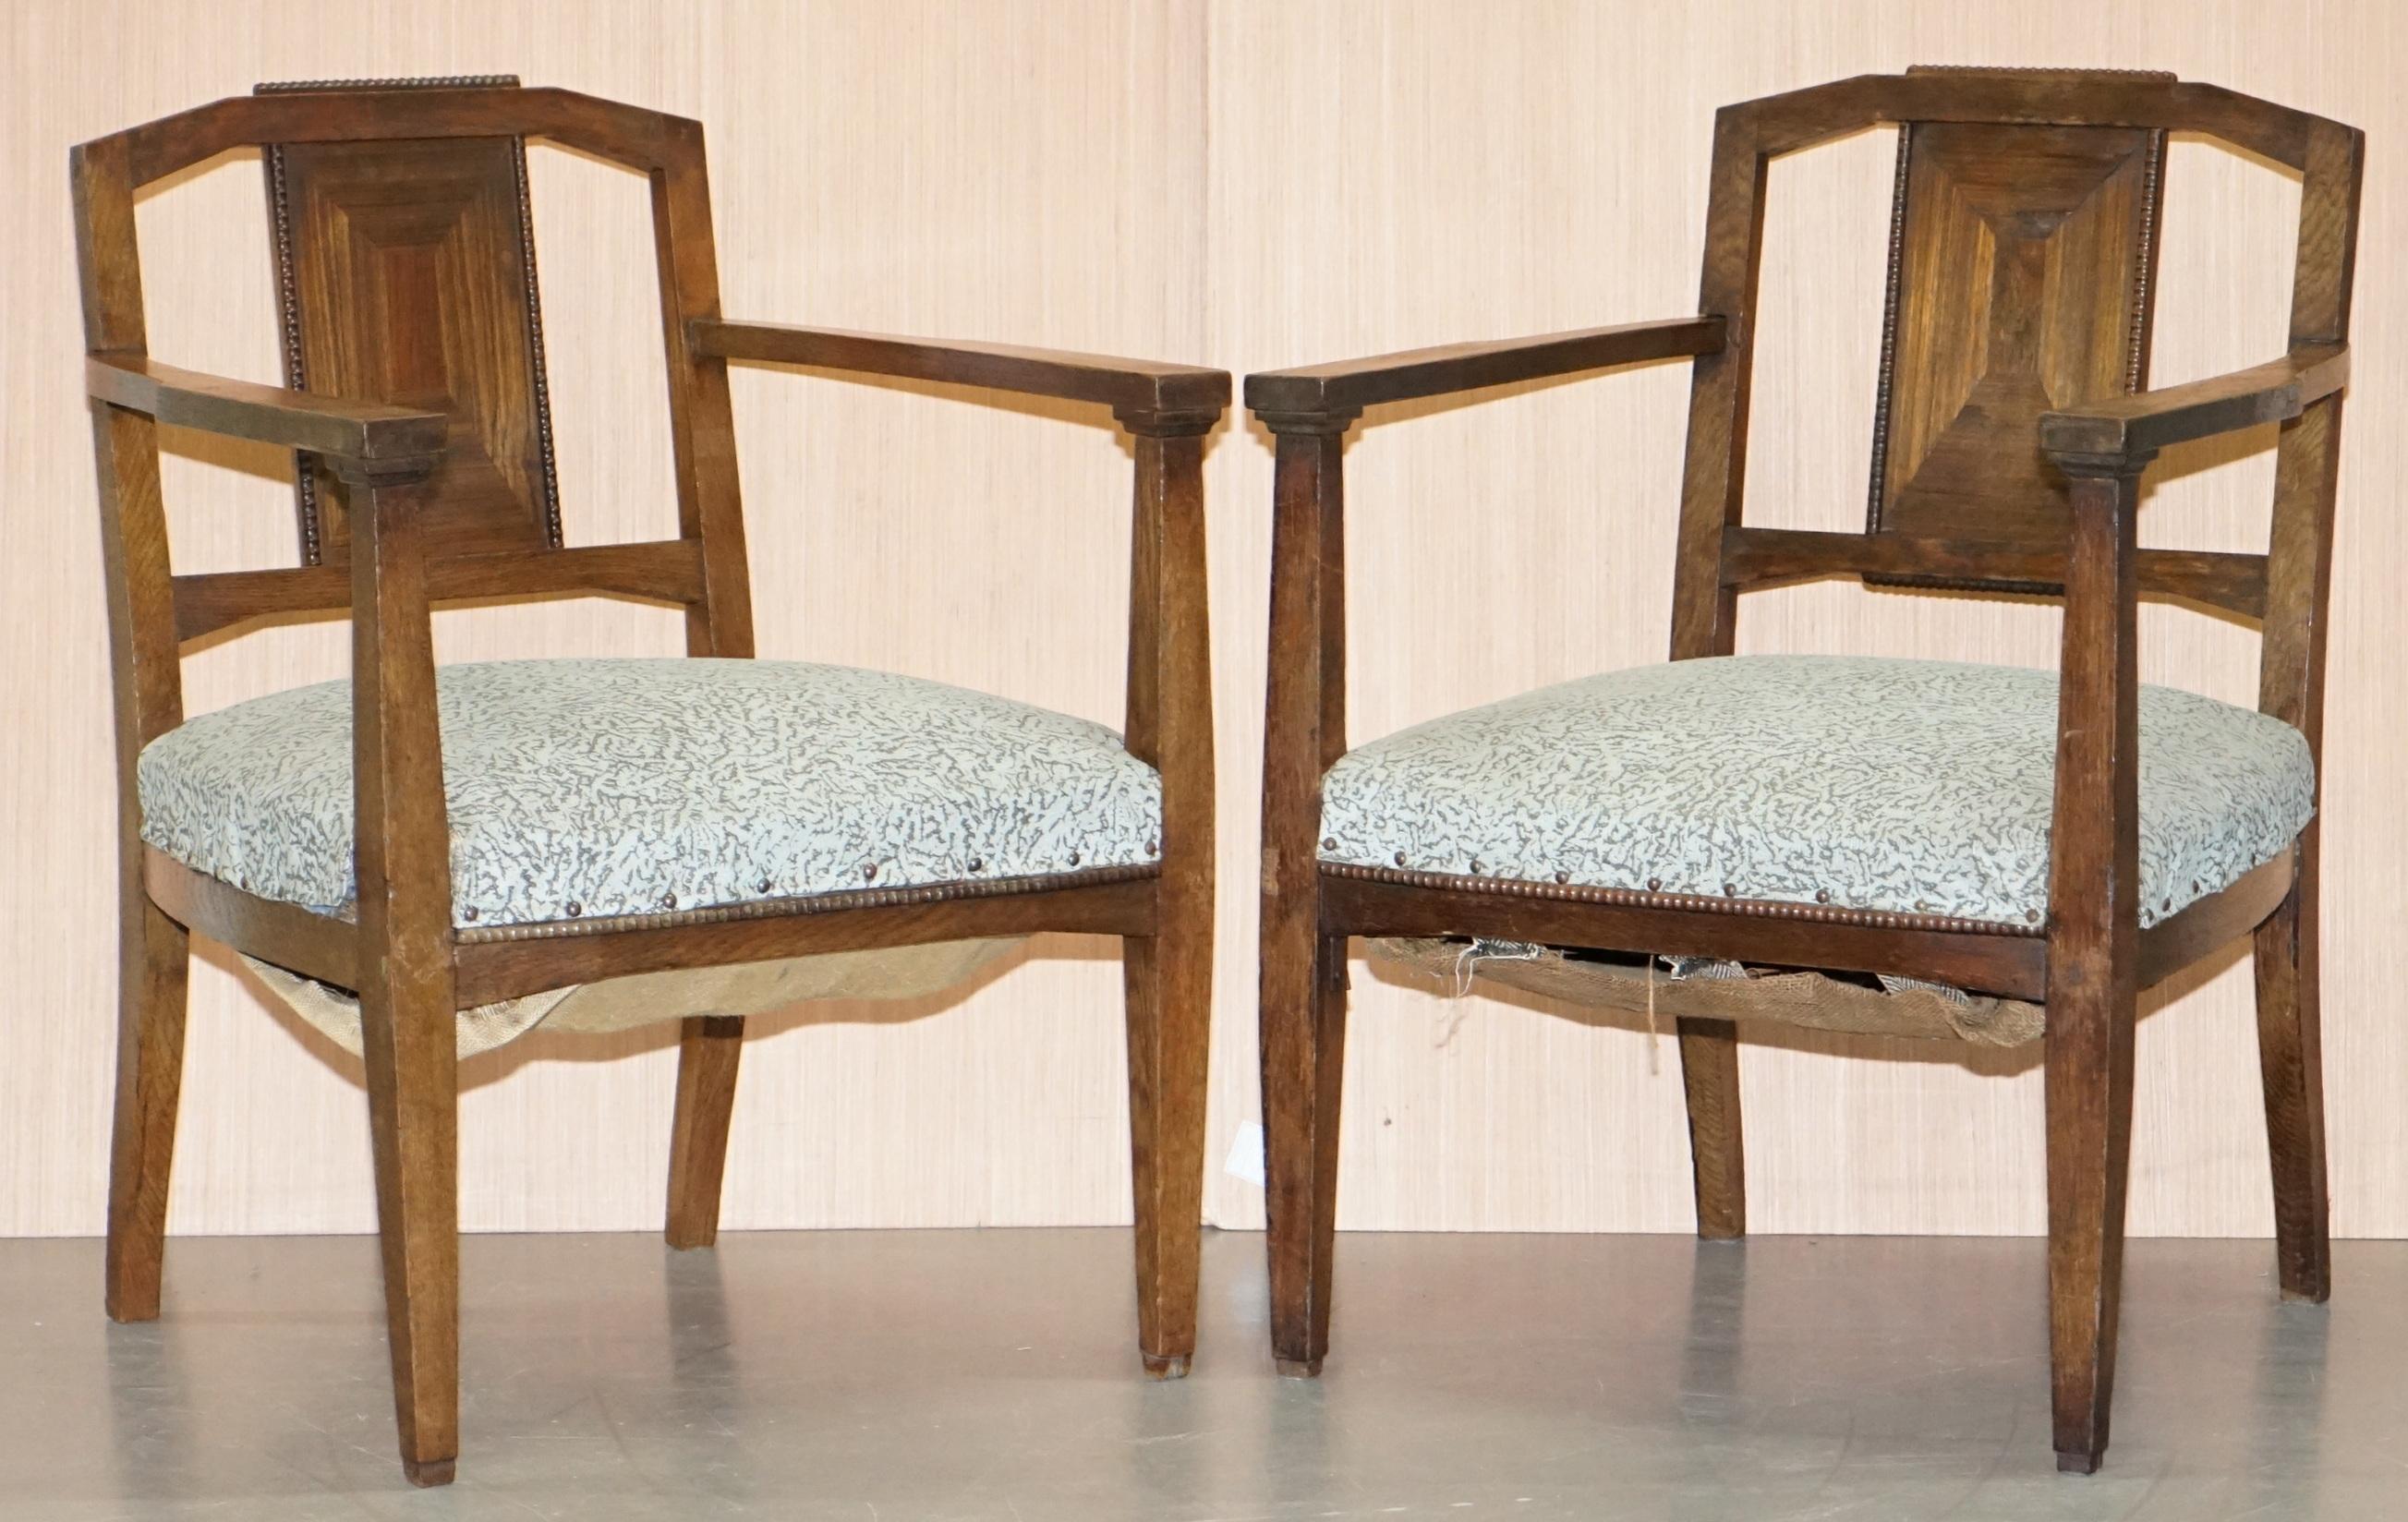 We are delighted to offer for sale set of four early 20th century William Morris for Liberty London armchairs

A very good looking and well made set of four highly decorative chairs. They were sold to me as William Morris made for Liberty’s